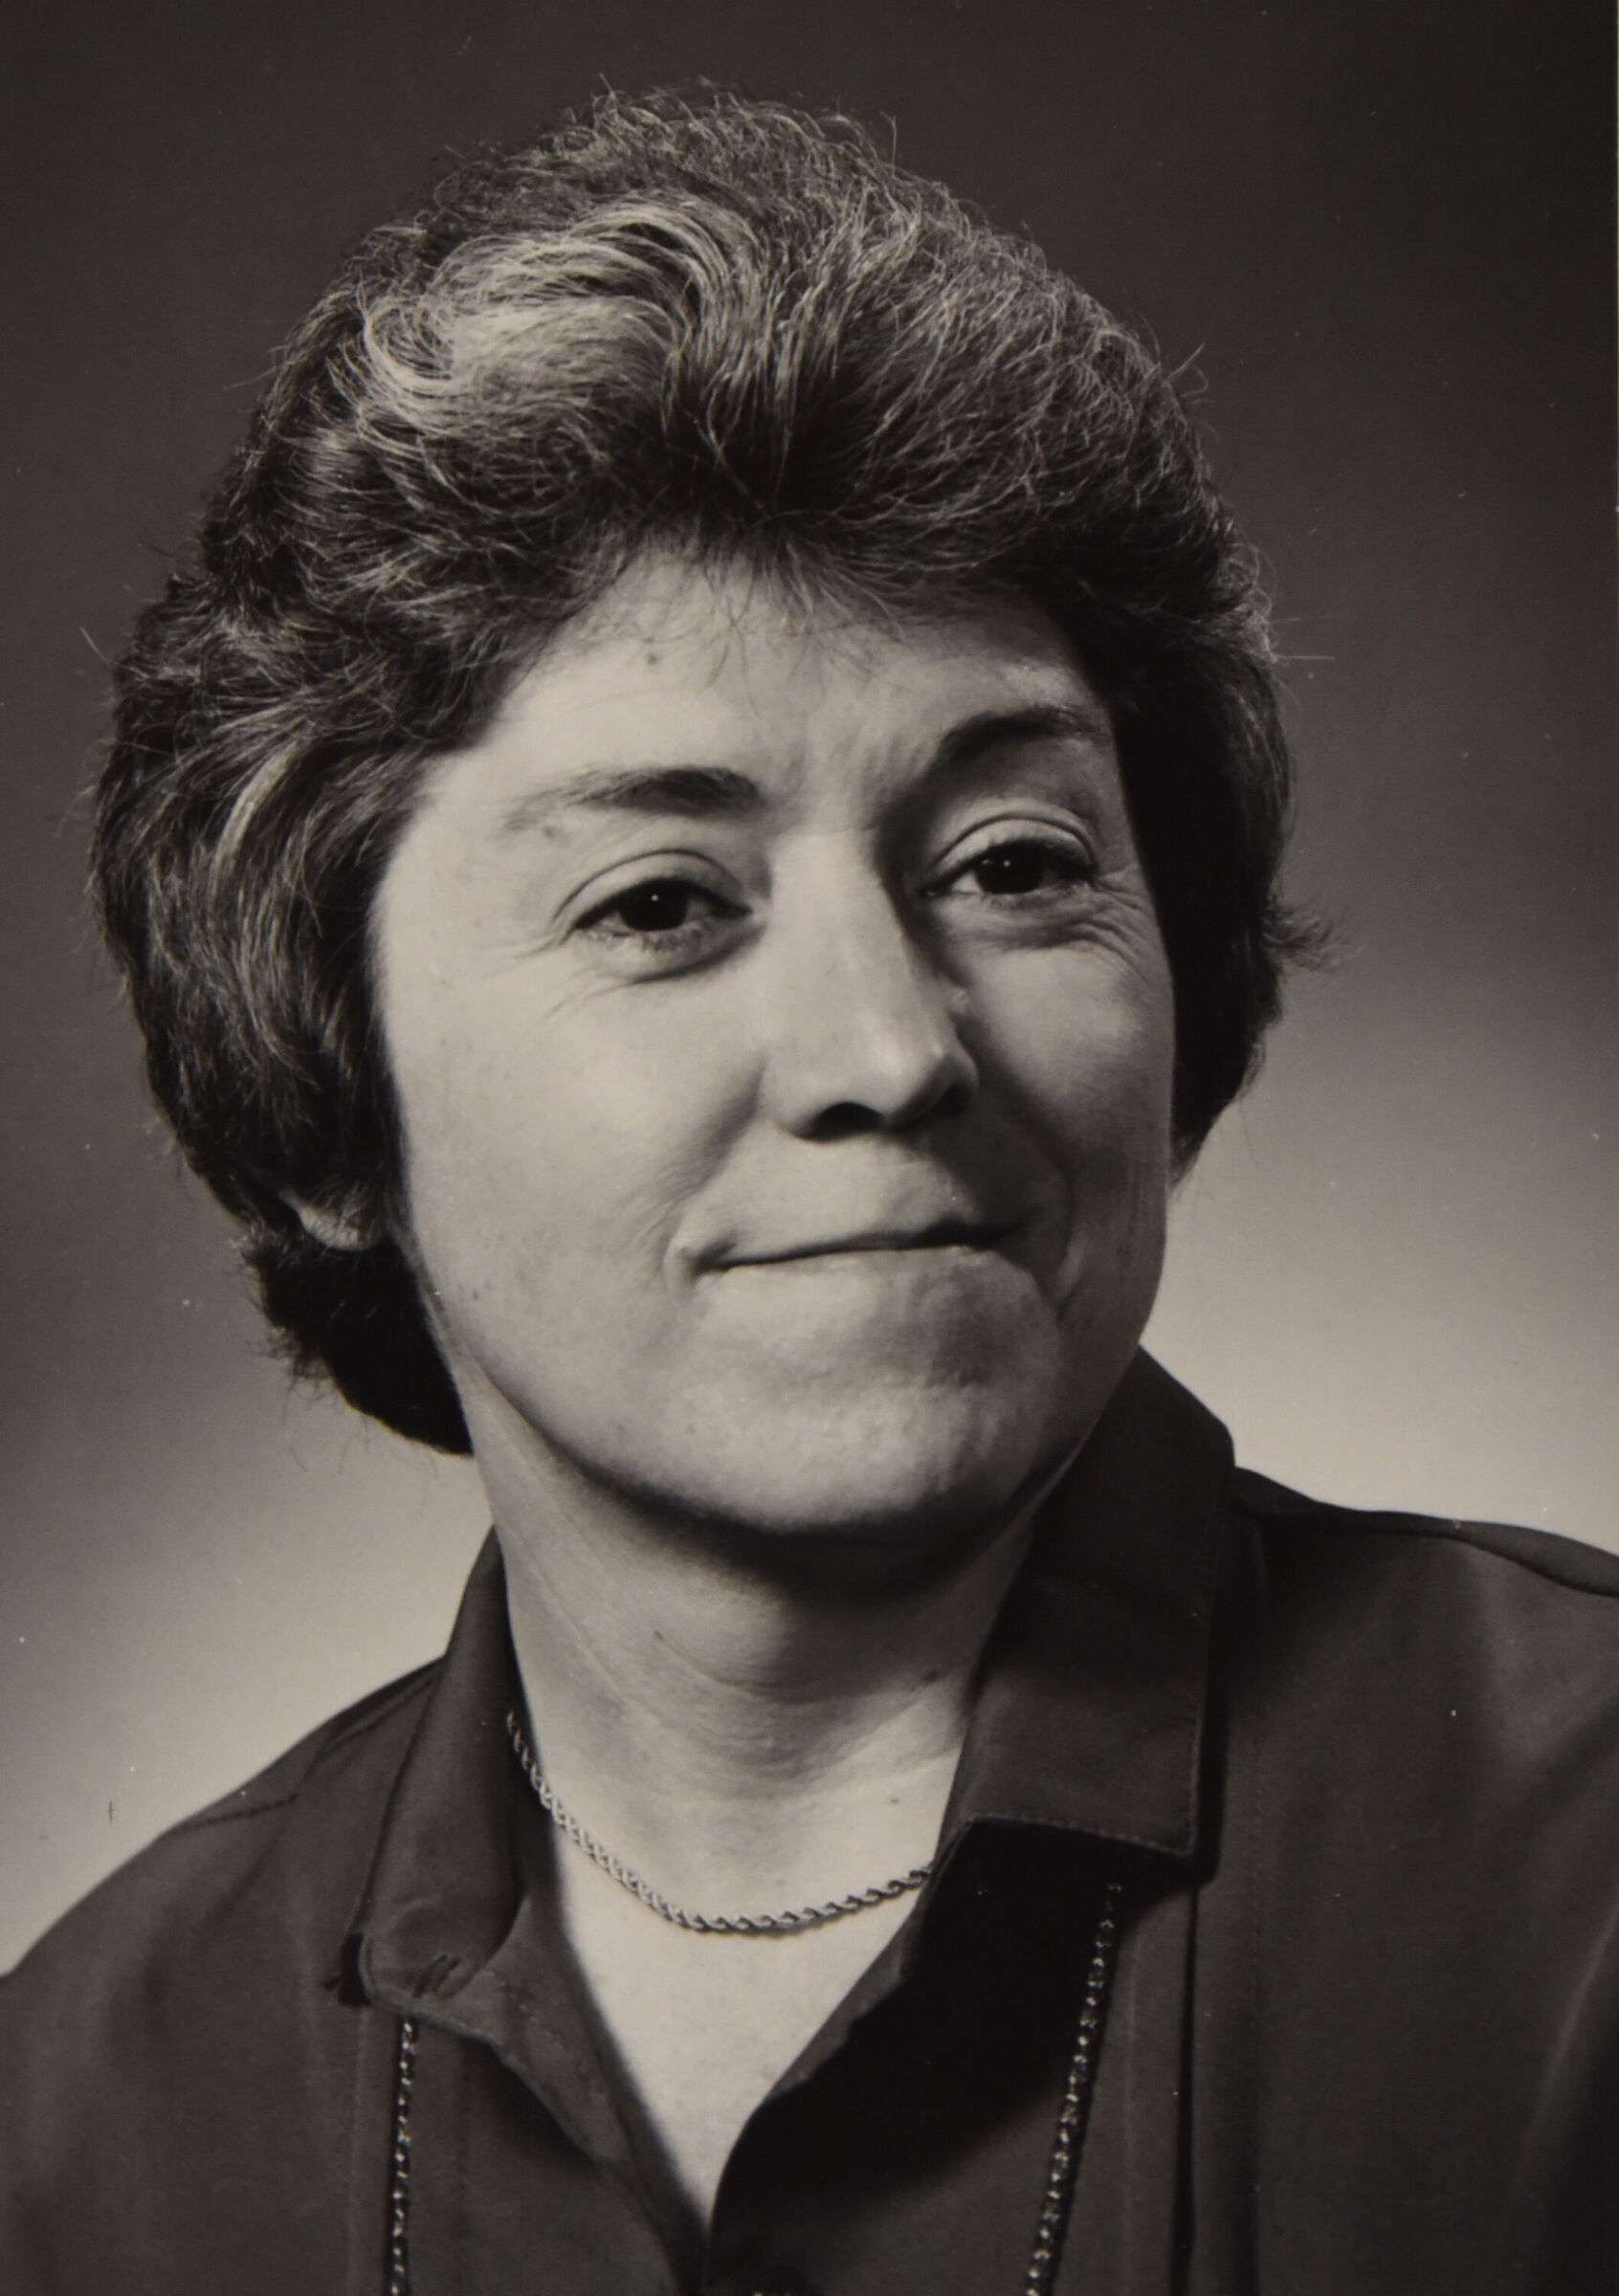 Phyllis Holmes remembered as athlete, coach, athletic director, and NAIA pioneer